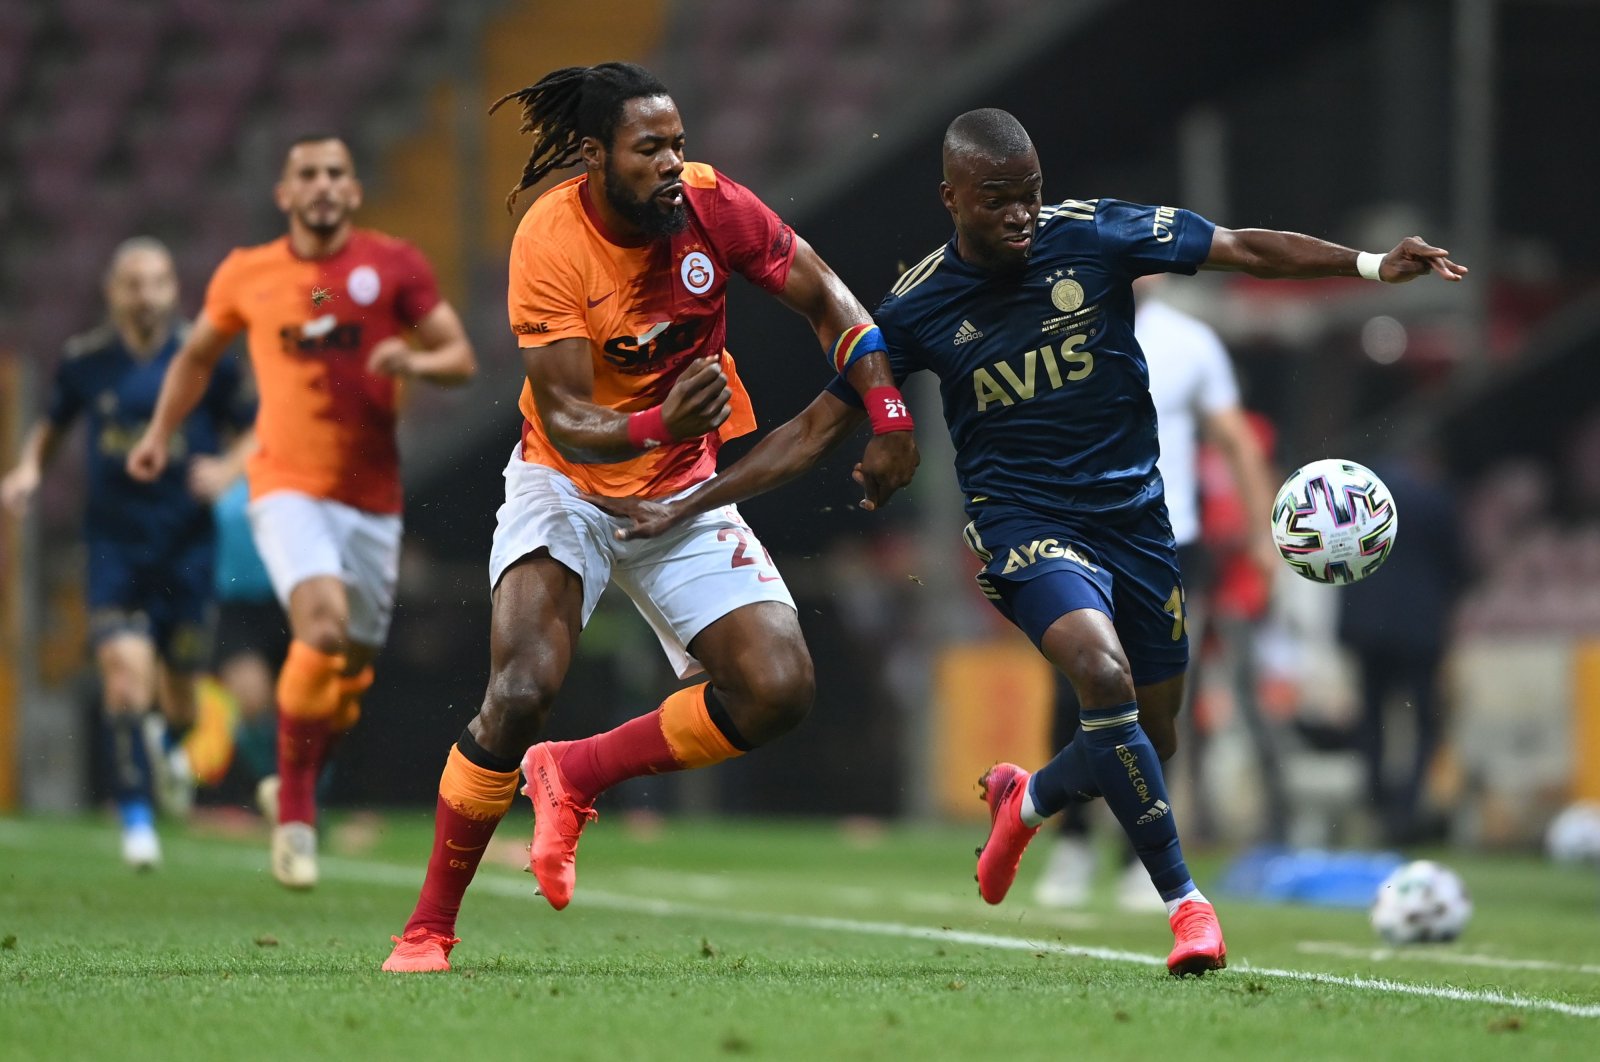 Fenerbahçe's Ecuadorian forward Enner Valencia (R) vies for the ball with Galatasaray's Congoloses defender Christian Luyindama during the Turkish Süper Lig football match between Galatasaray and Fenerbahçe at the Ali Sami Yen stadium in Istanbul on Sept. 27, 2020. (AFP Photo)